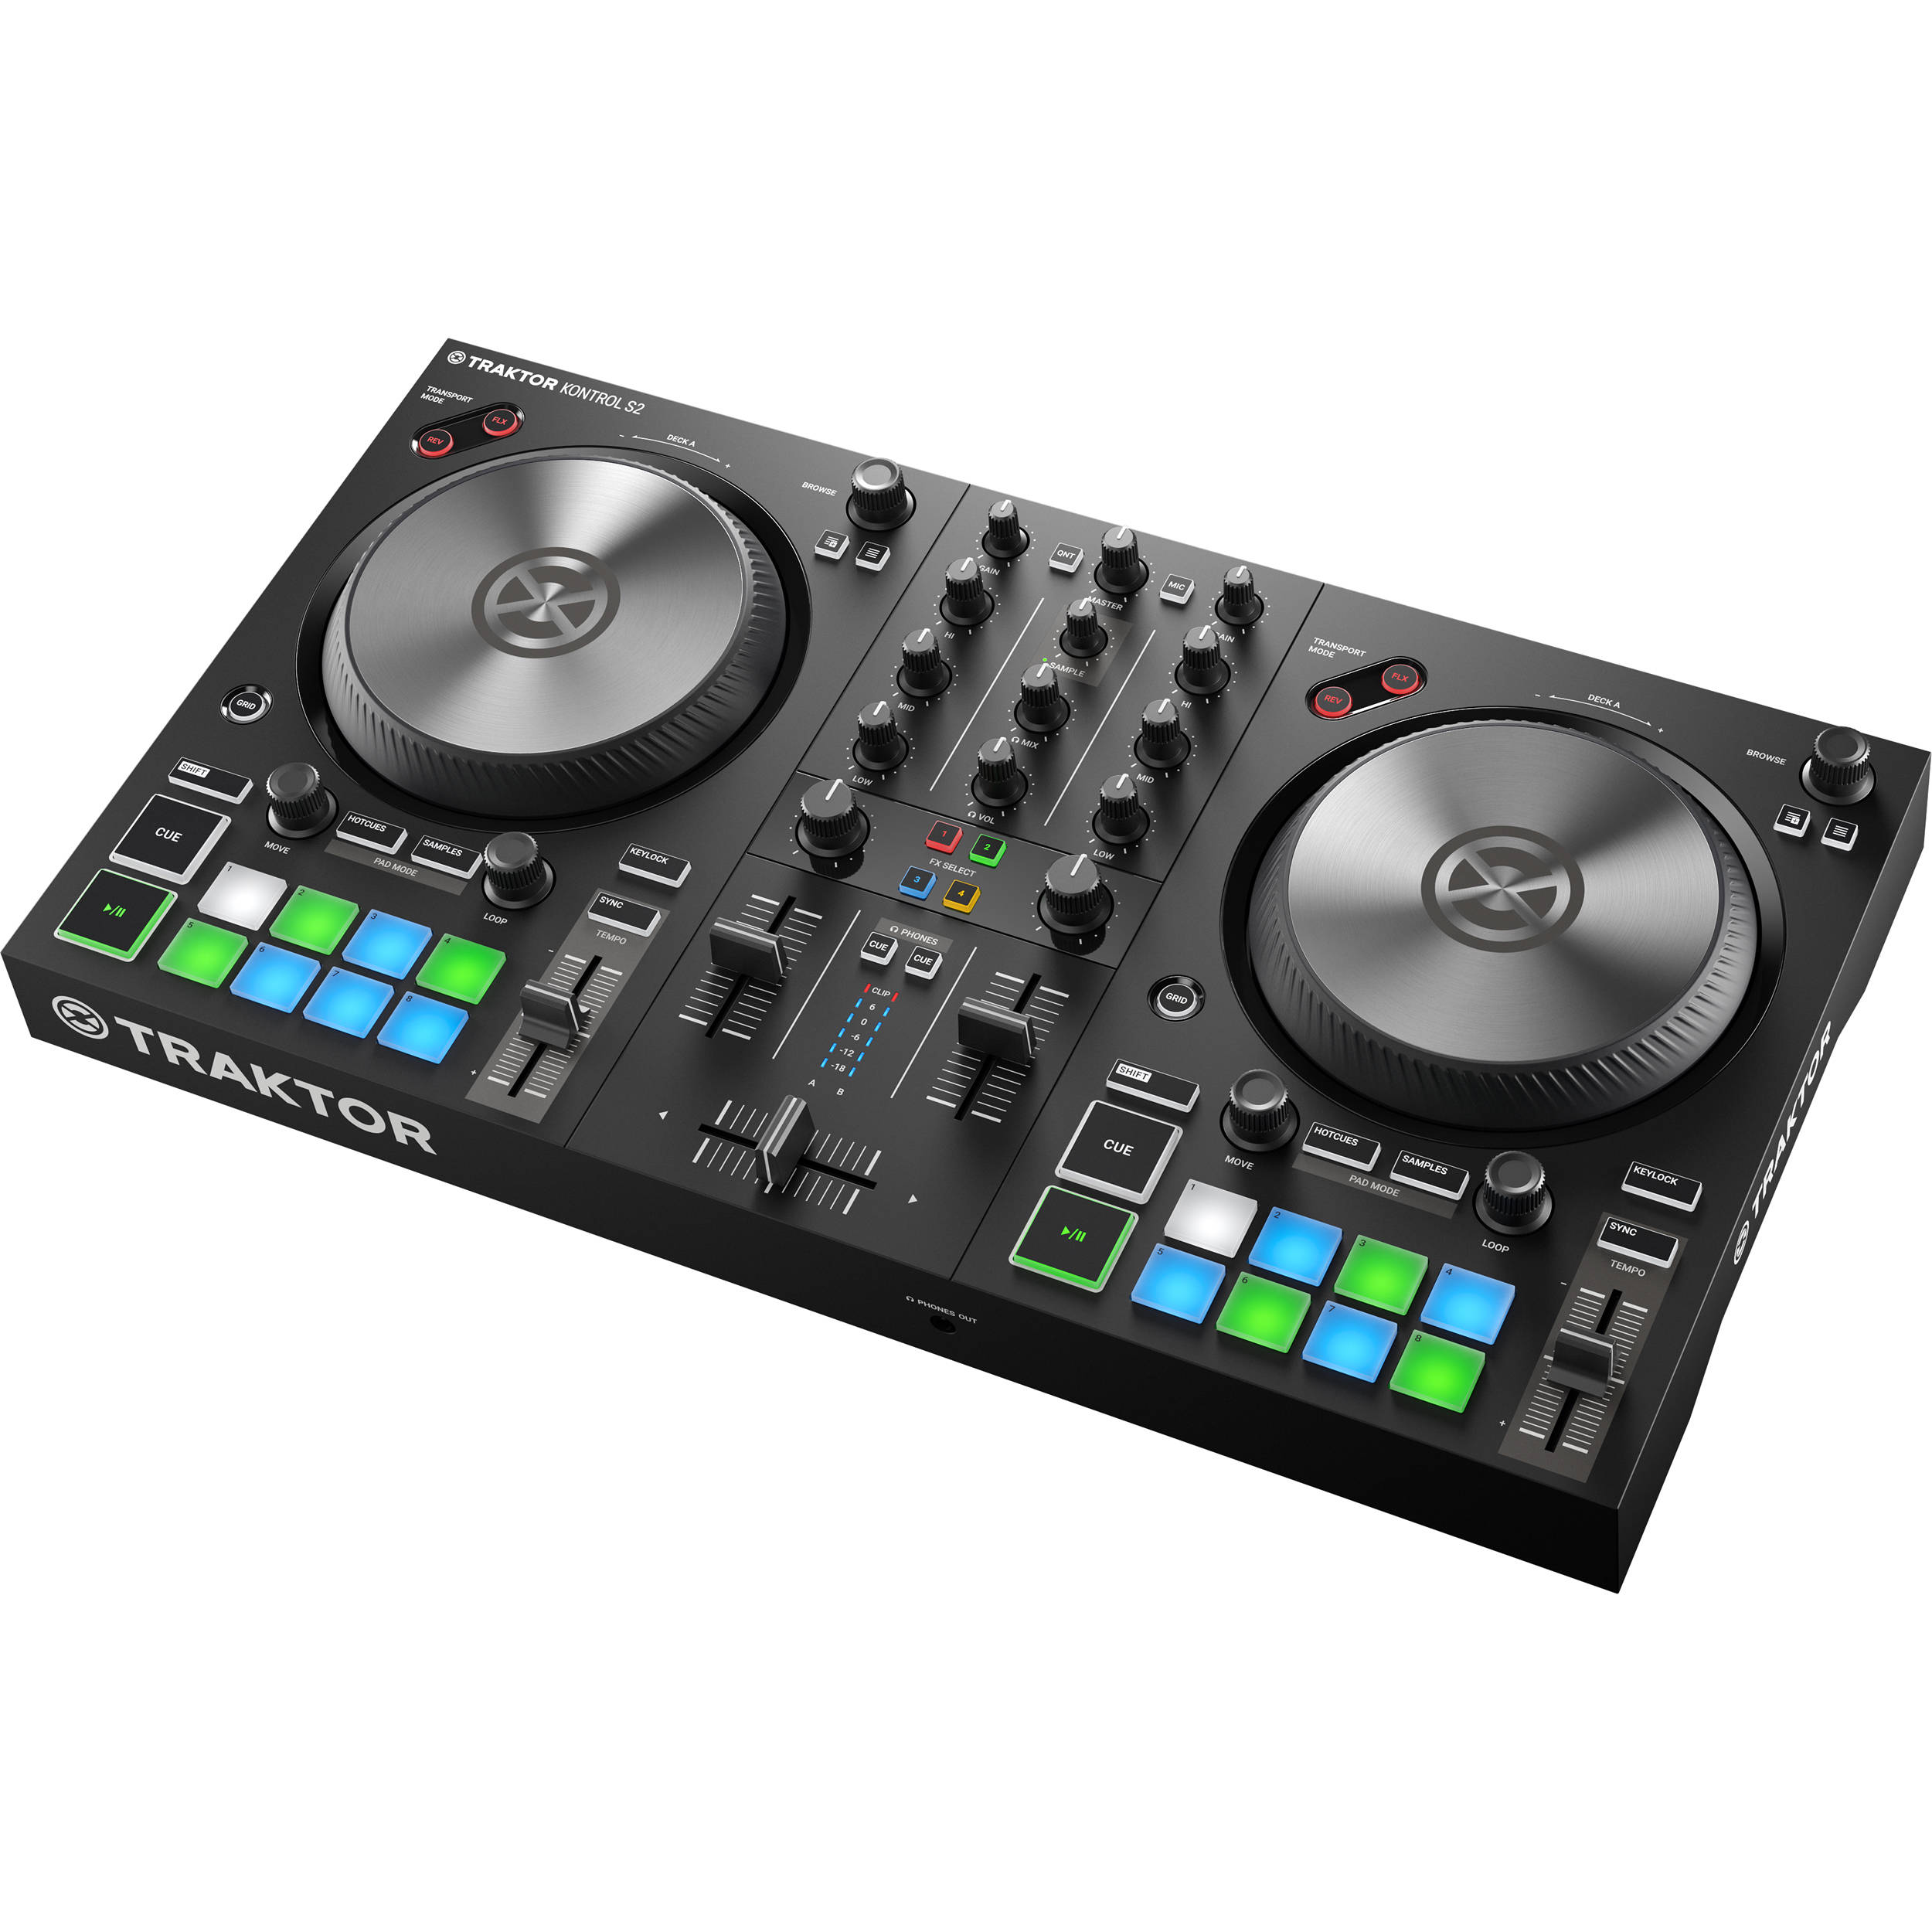 Does The Traktor S2 Work With Djay Pro 2